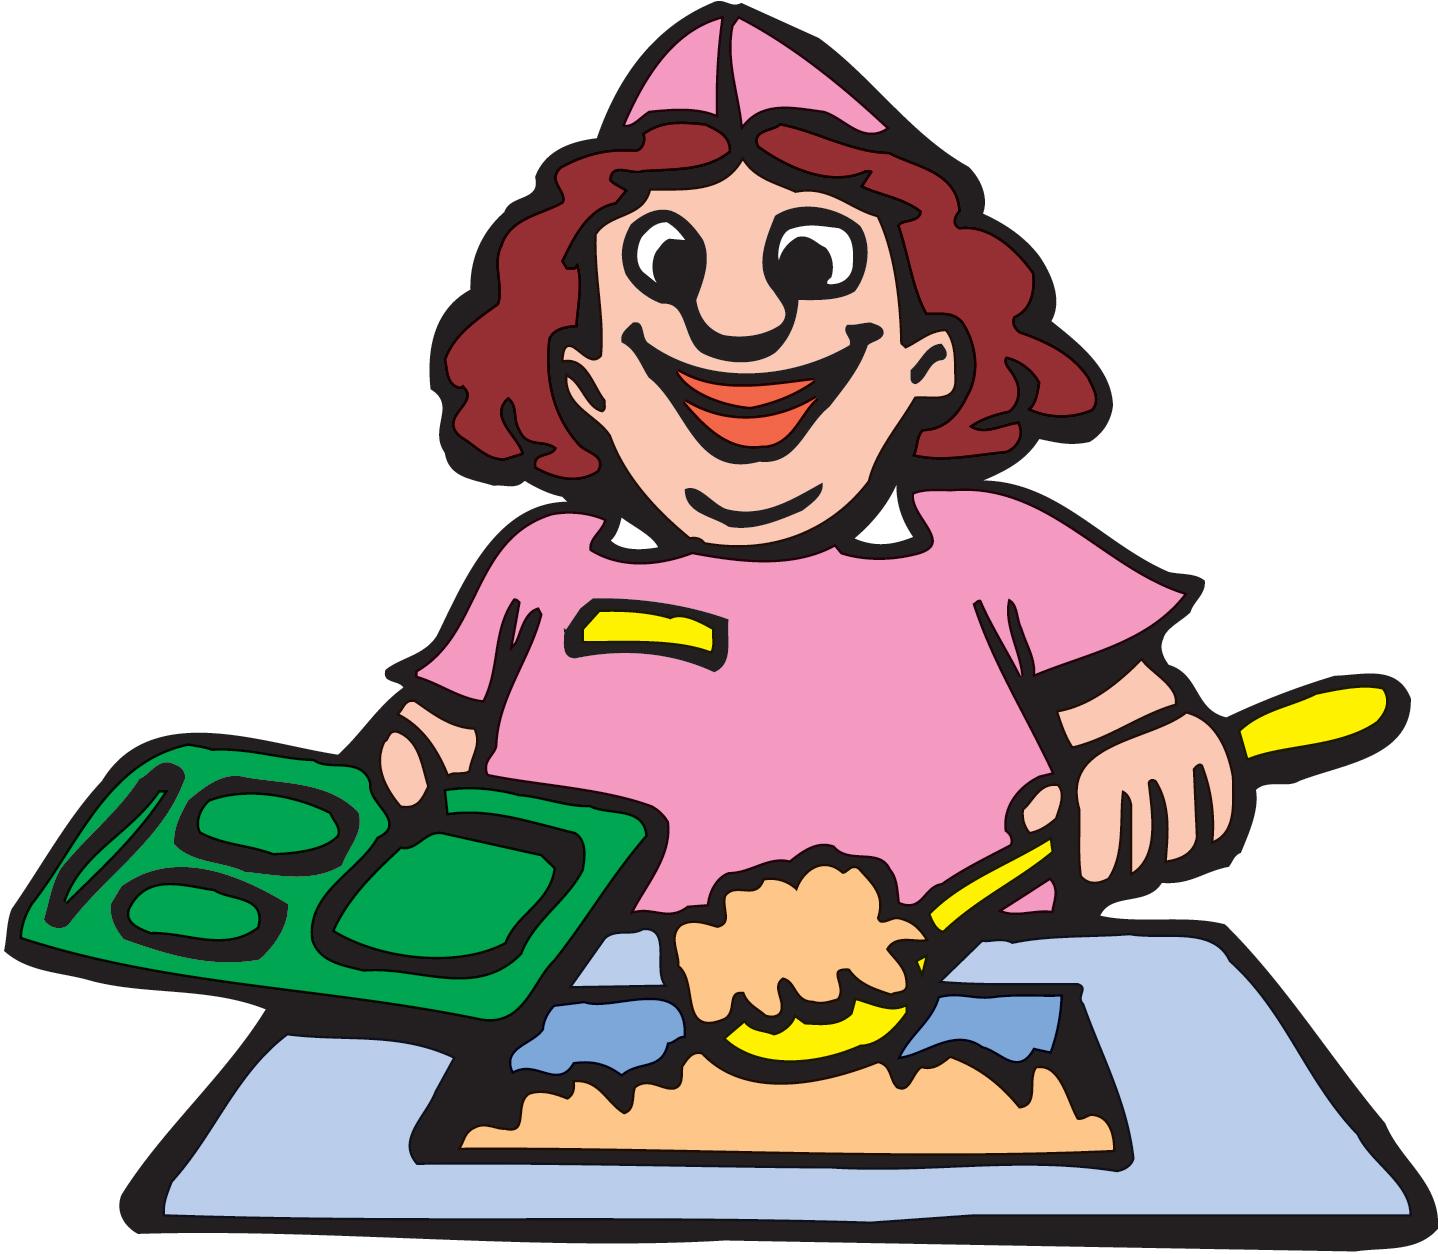 Cafeteria clipart lunch lady, Cafeteria lunch lady Transparent FREE for